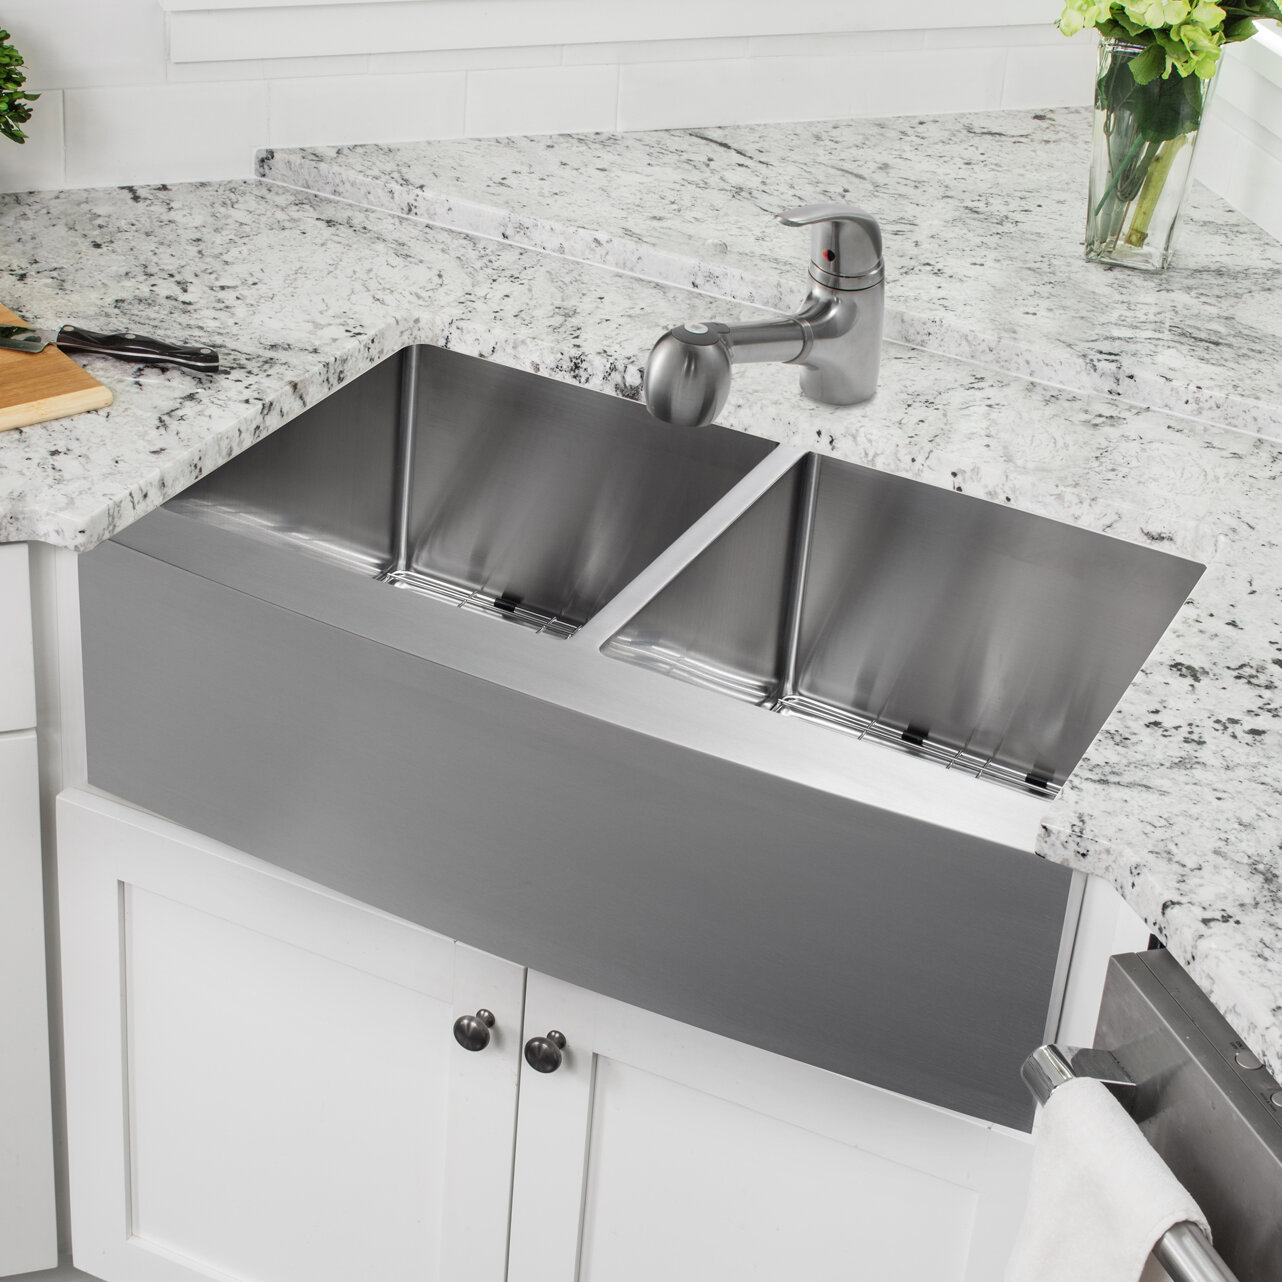 32 88 L X 20 75 W Apron Front 50 50 Stainless Steel Kitchen Sink With Faucet